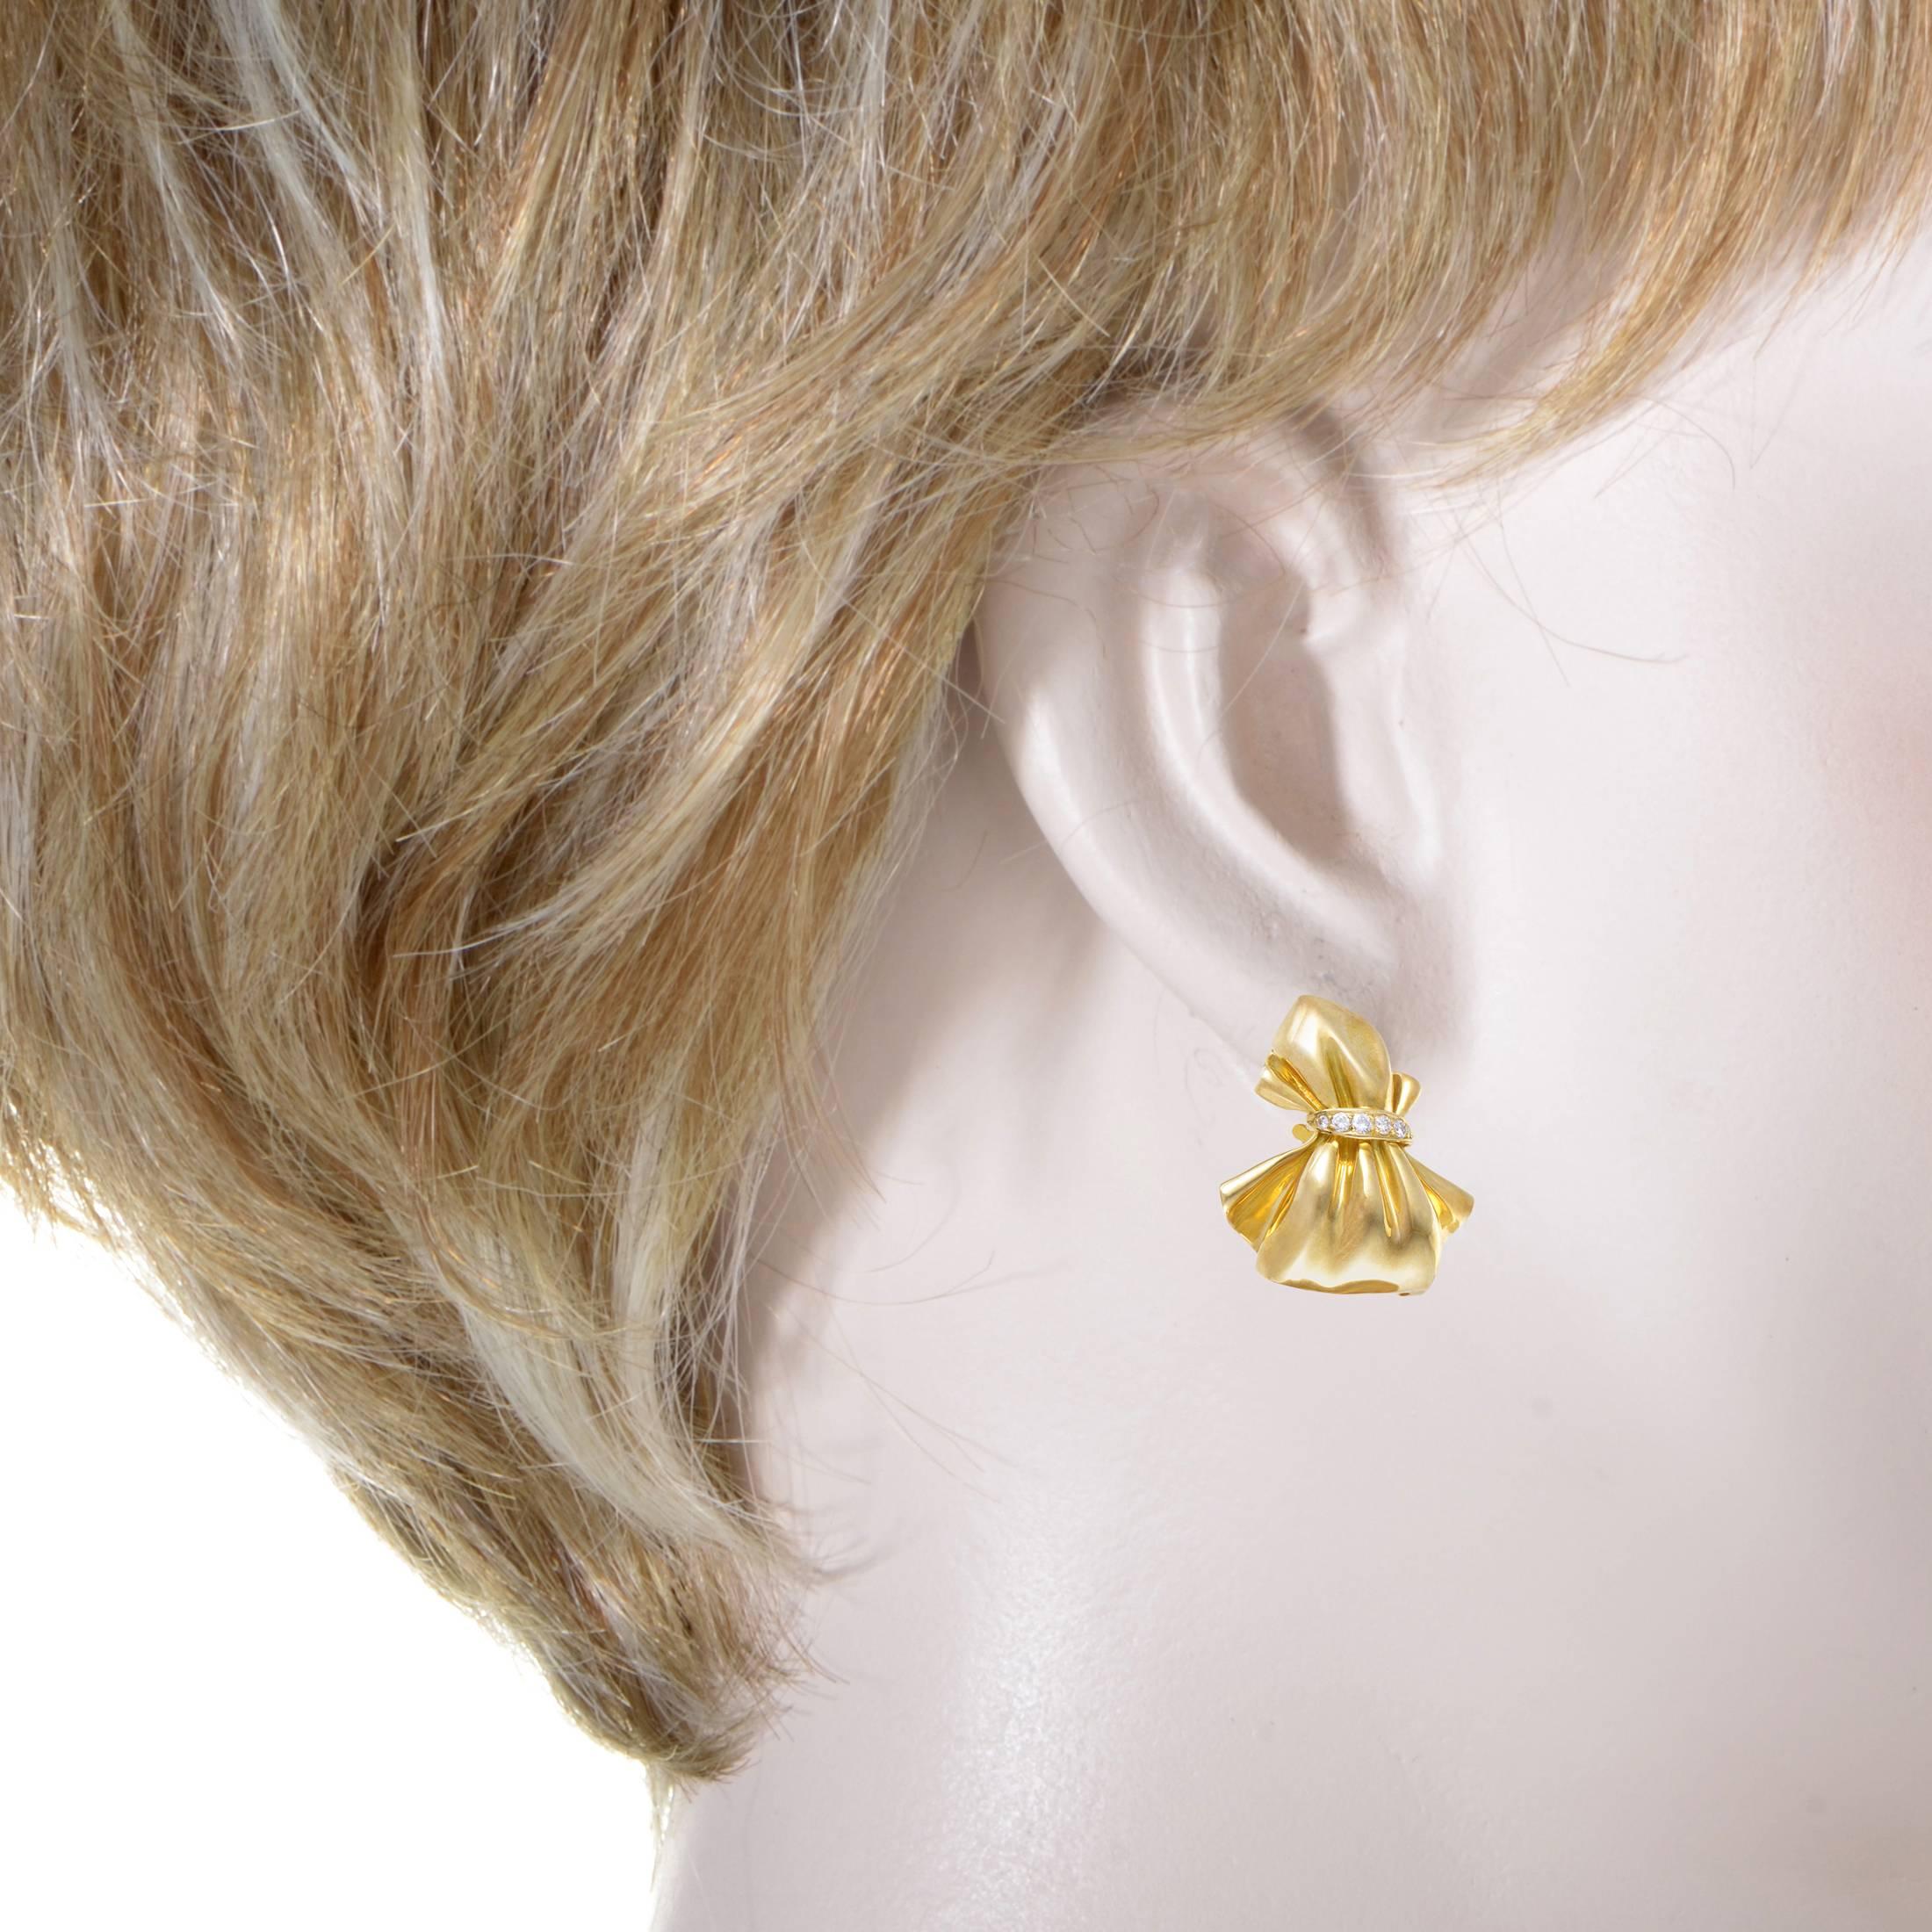 Brilliantly envisioned and crafted with extraordinary expertise to depict in astoundingly realistic fashion the adorable motif of a bow, these magnificent 18K yellow gold earrings from Van Cleef & Arpels are embellished with lustrous diamonds